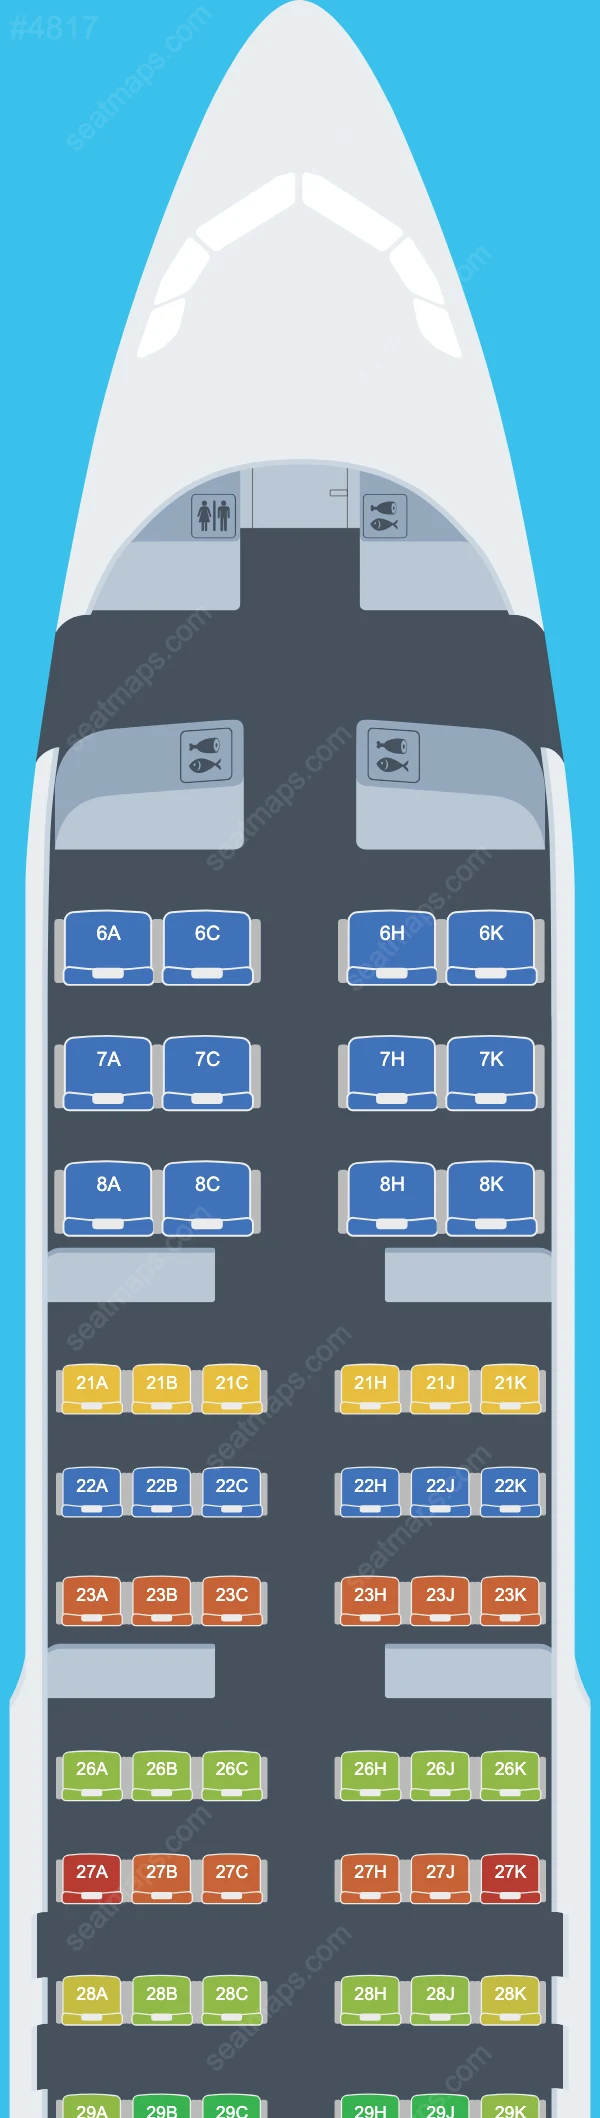 Royal Brunei Airlines Airbus A320-200 seatmap preview